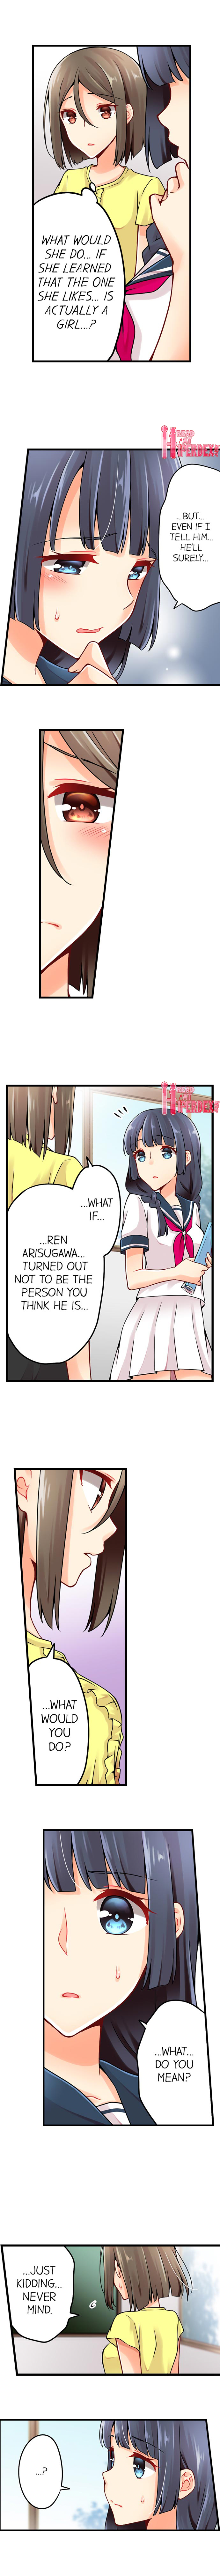 Ren Arisugawa Is Actually A Girl - Chapter 82 Page 3